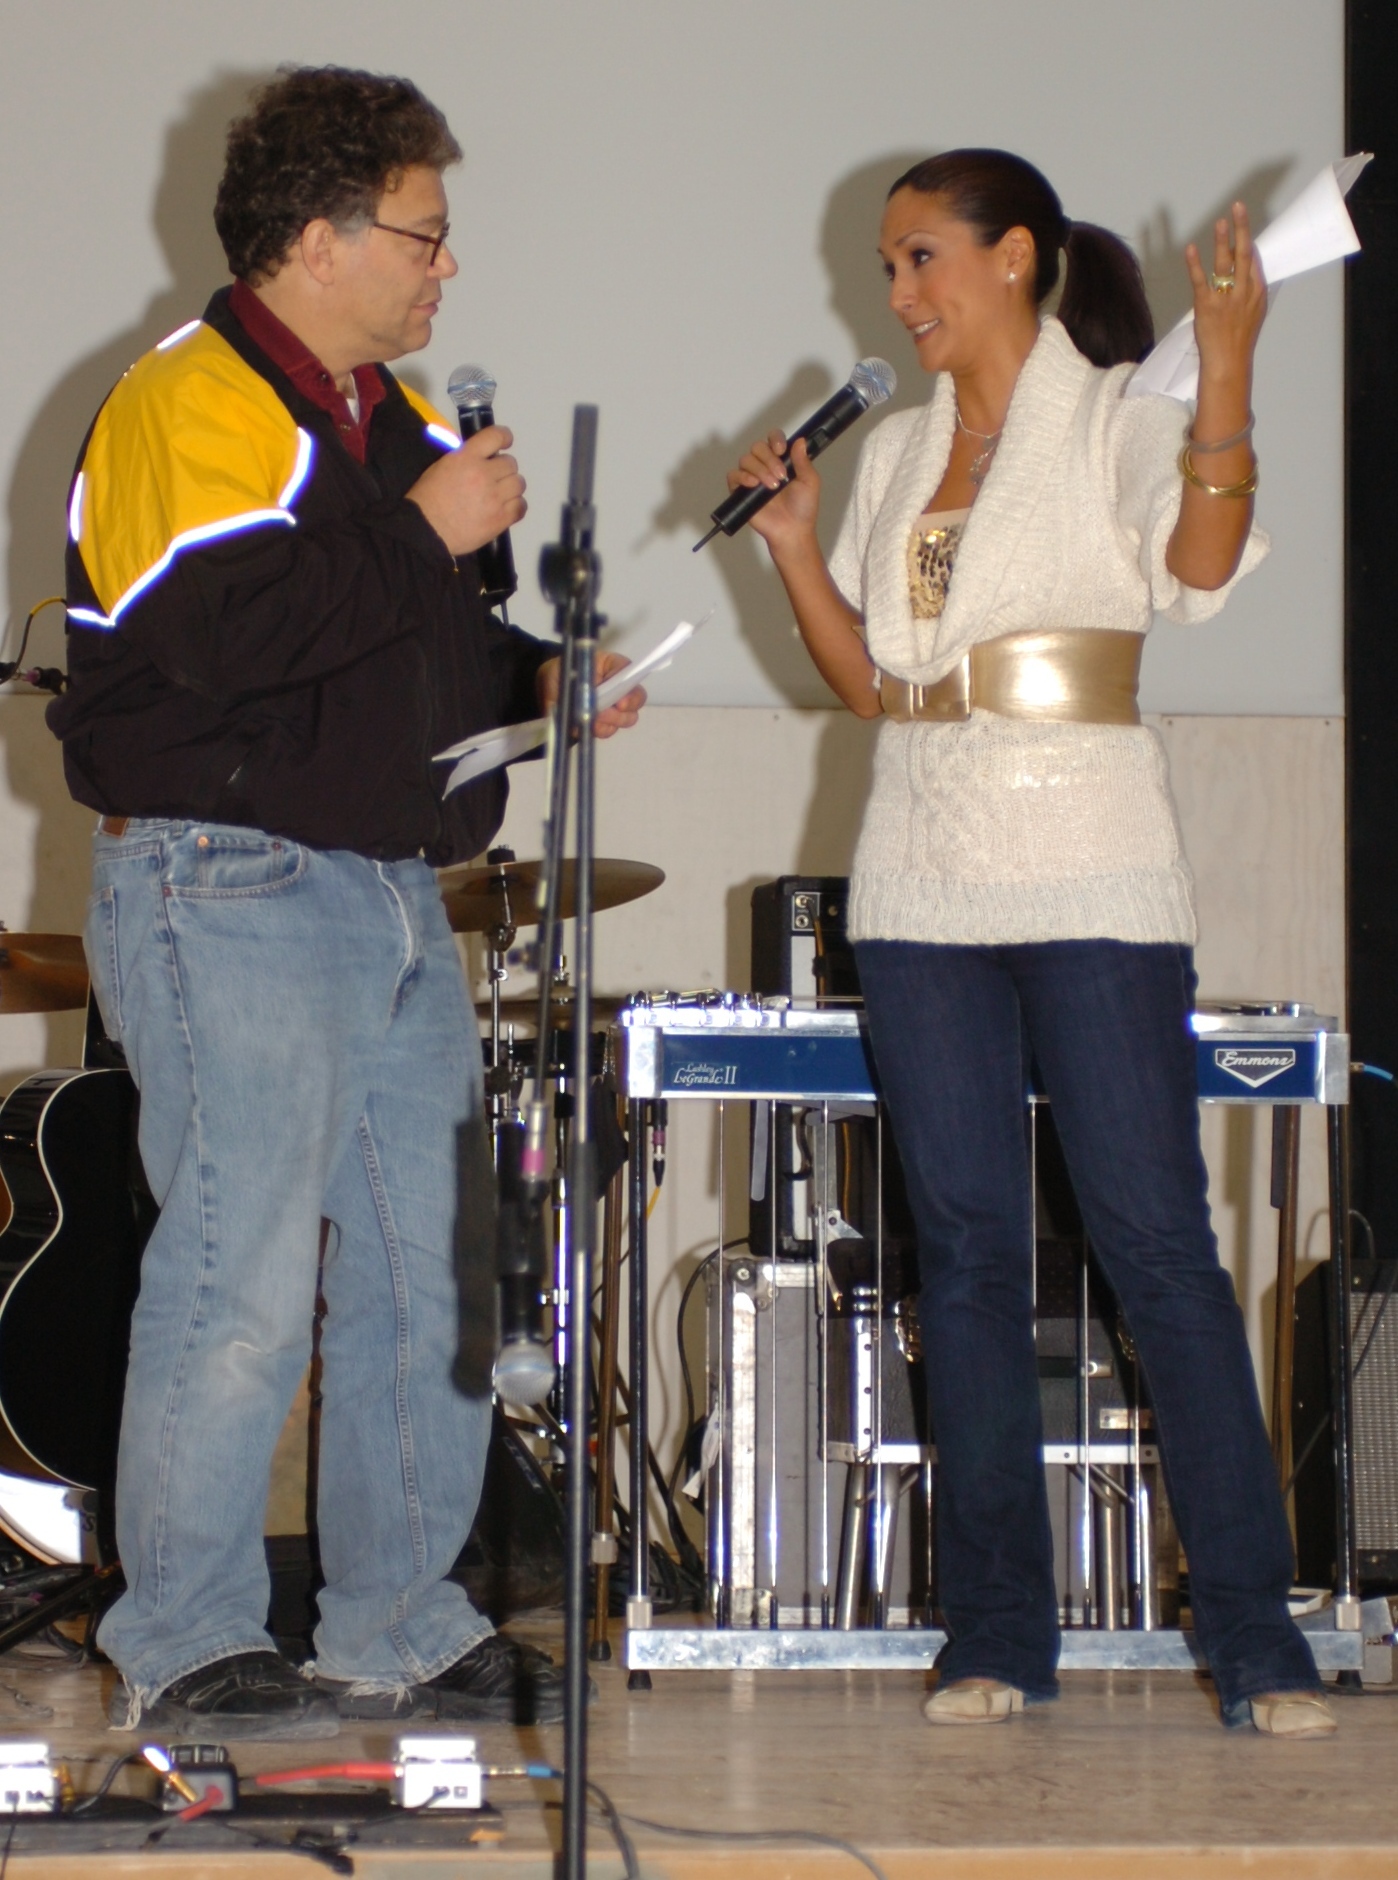 PHOTO: Al Franken and Leanne Tweeden entertain the soldiers with a skit involving underwear at Forward Operating Base Marez in Mosul, Iraq, Dec 16, 2006.